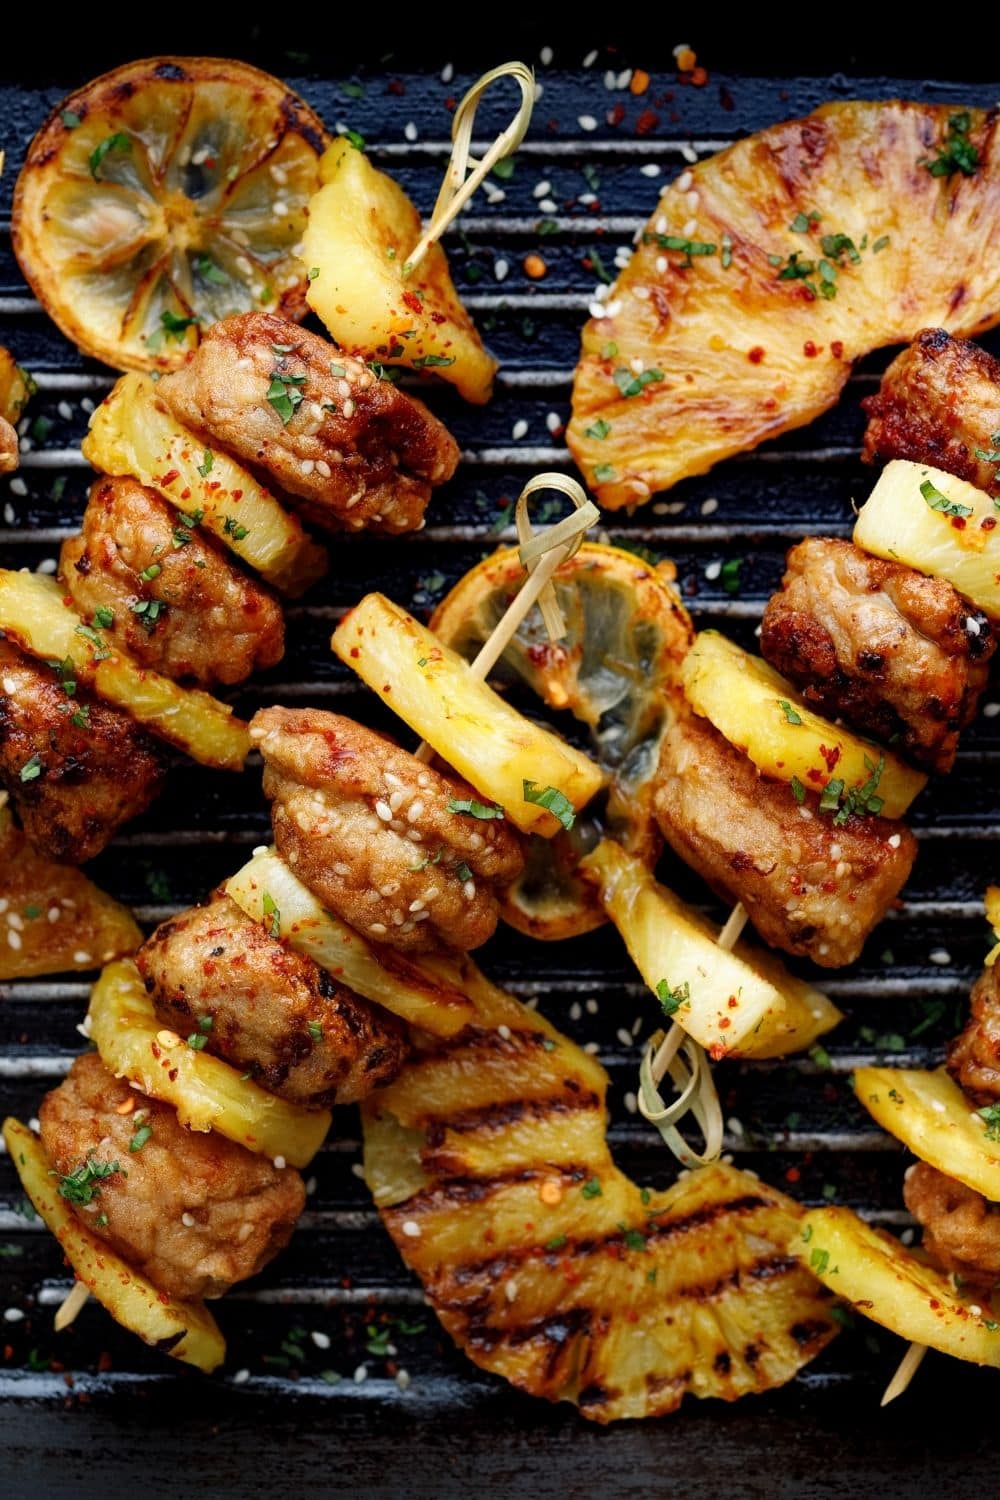 30 Easy BBQ Recipes for a Great Cookout – Insanely Good